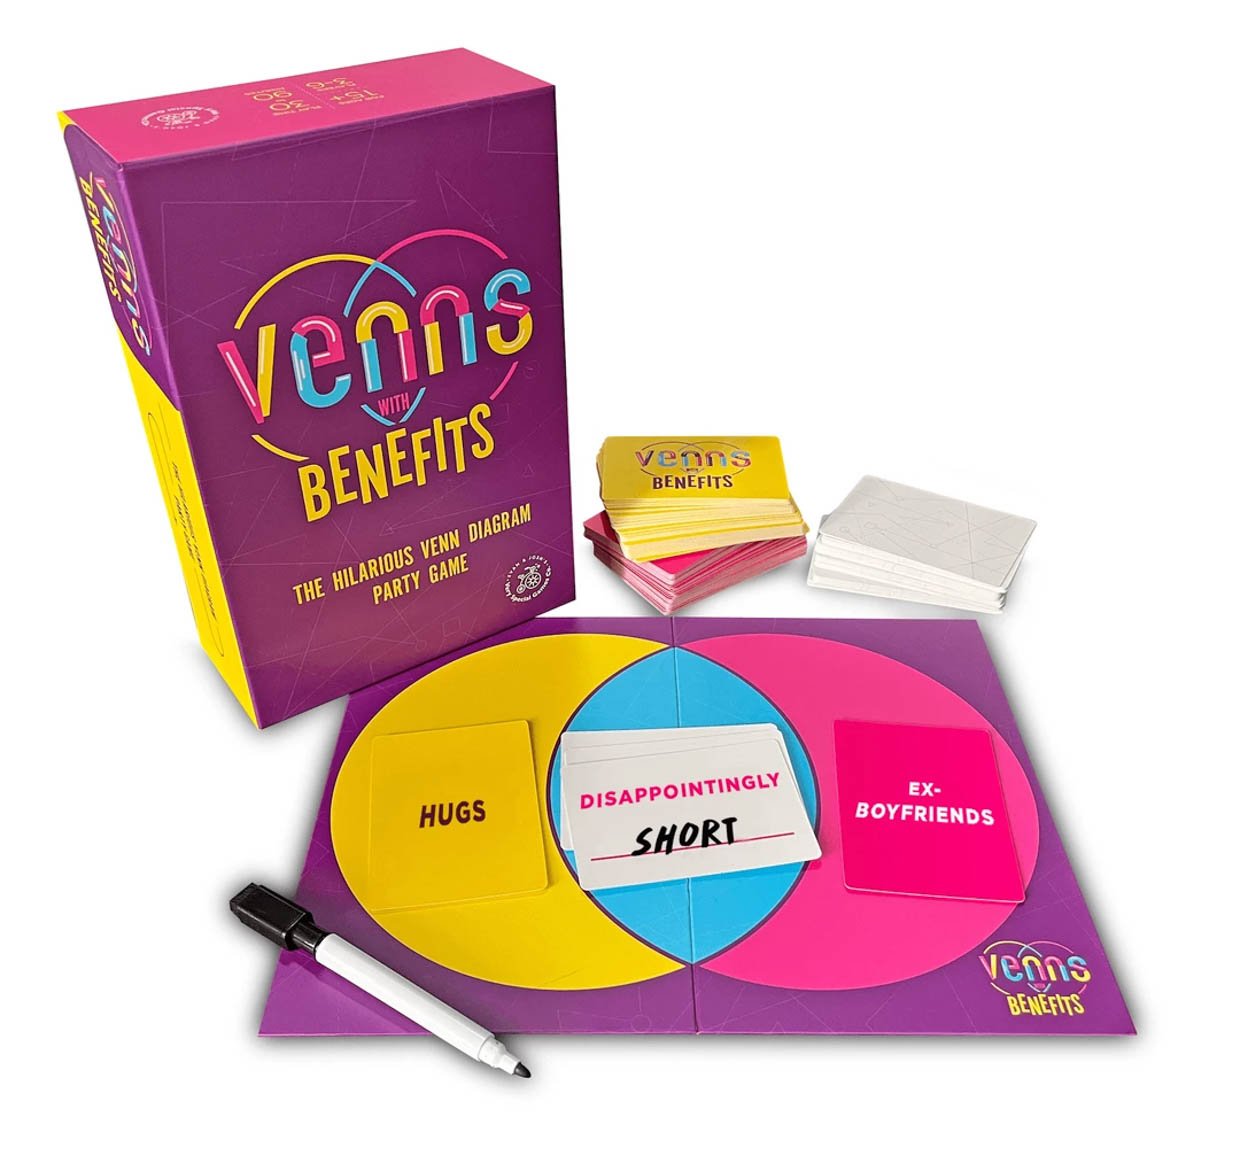 Venns with Benefits